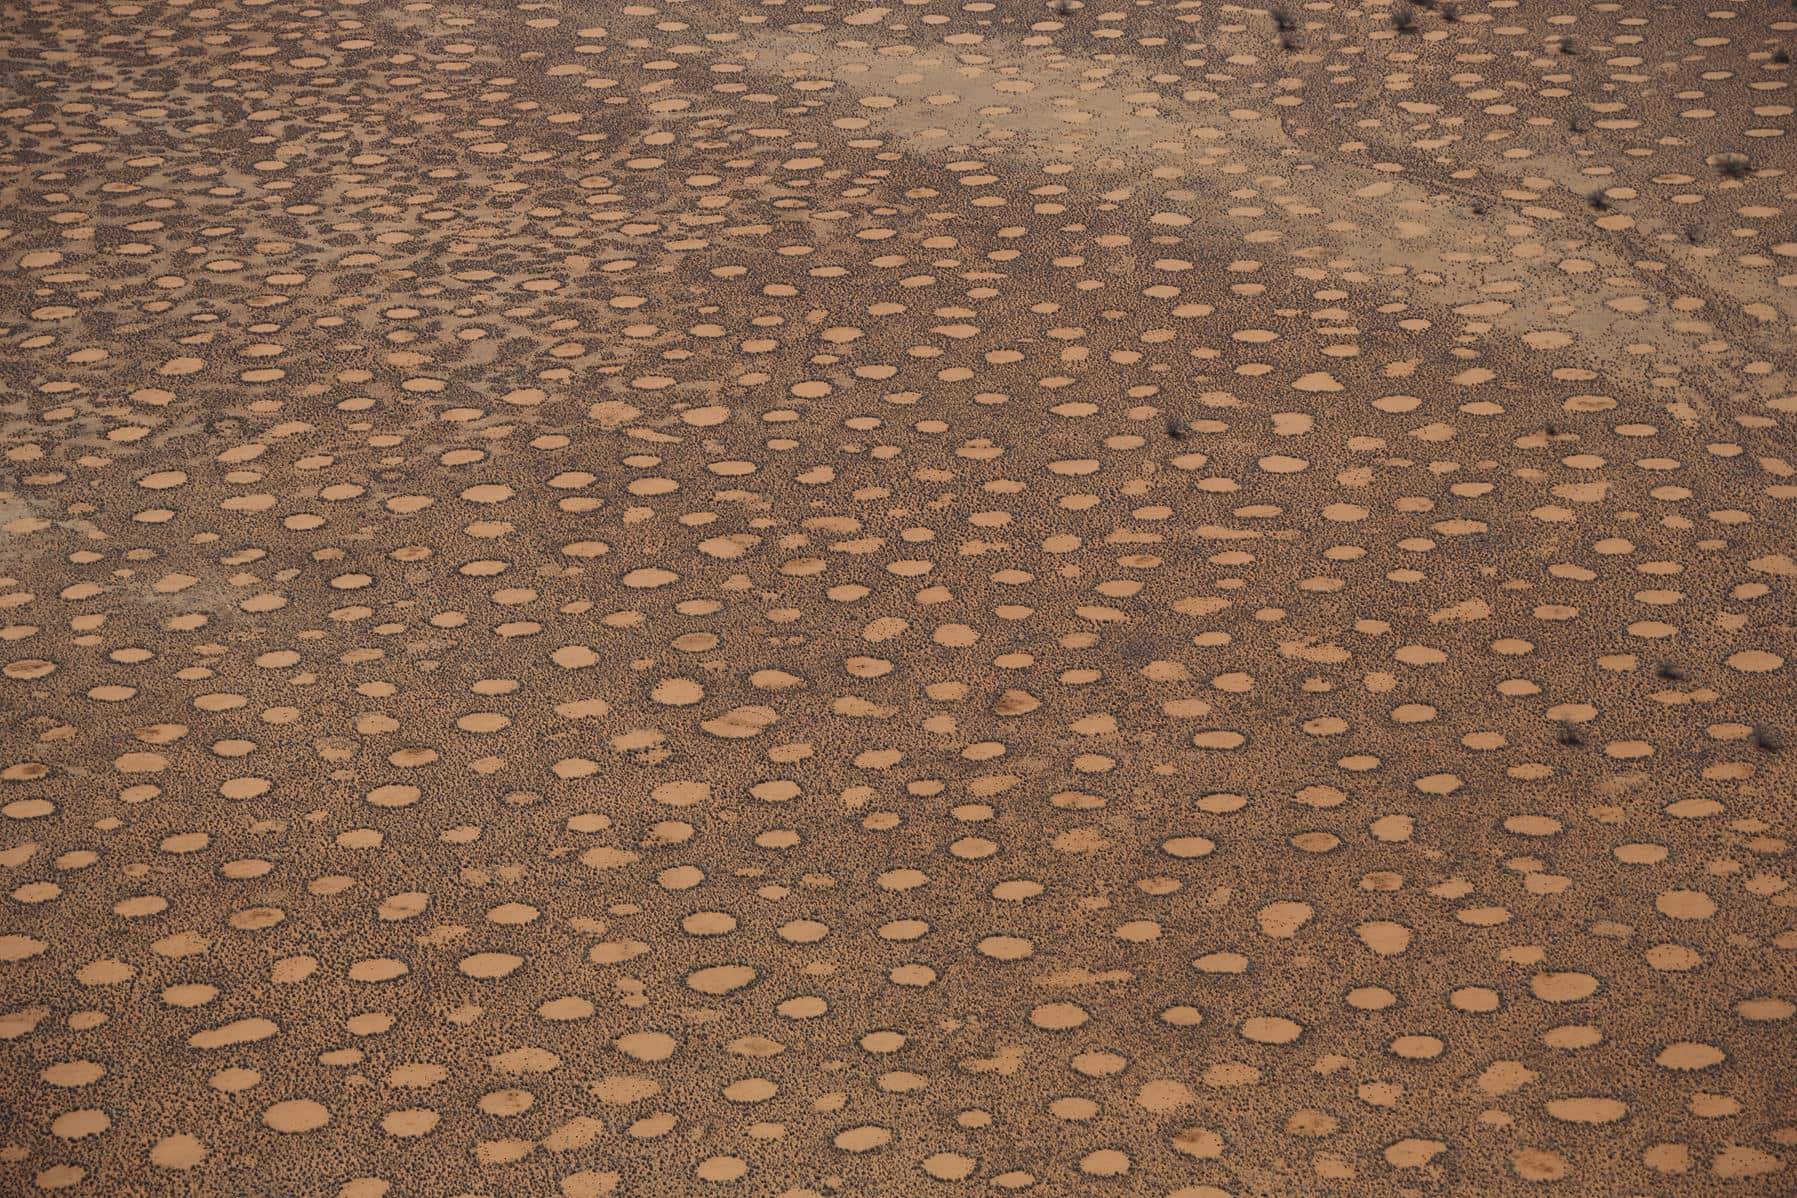 Mystery of Fairy Circles Solved